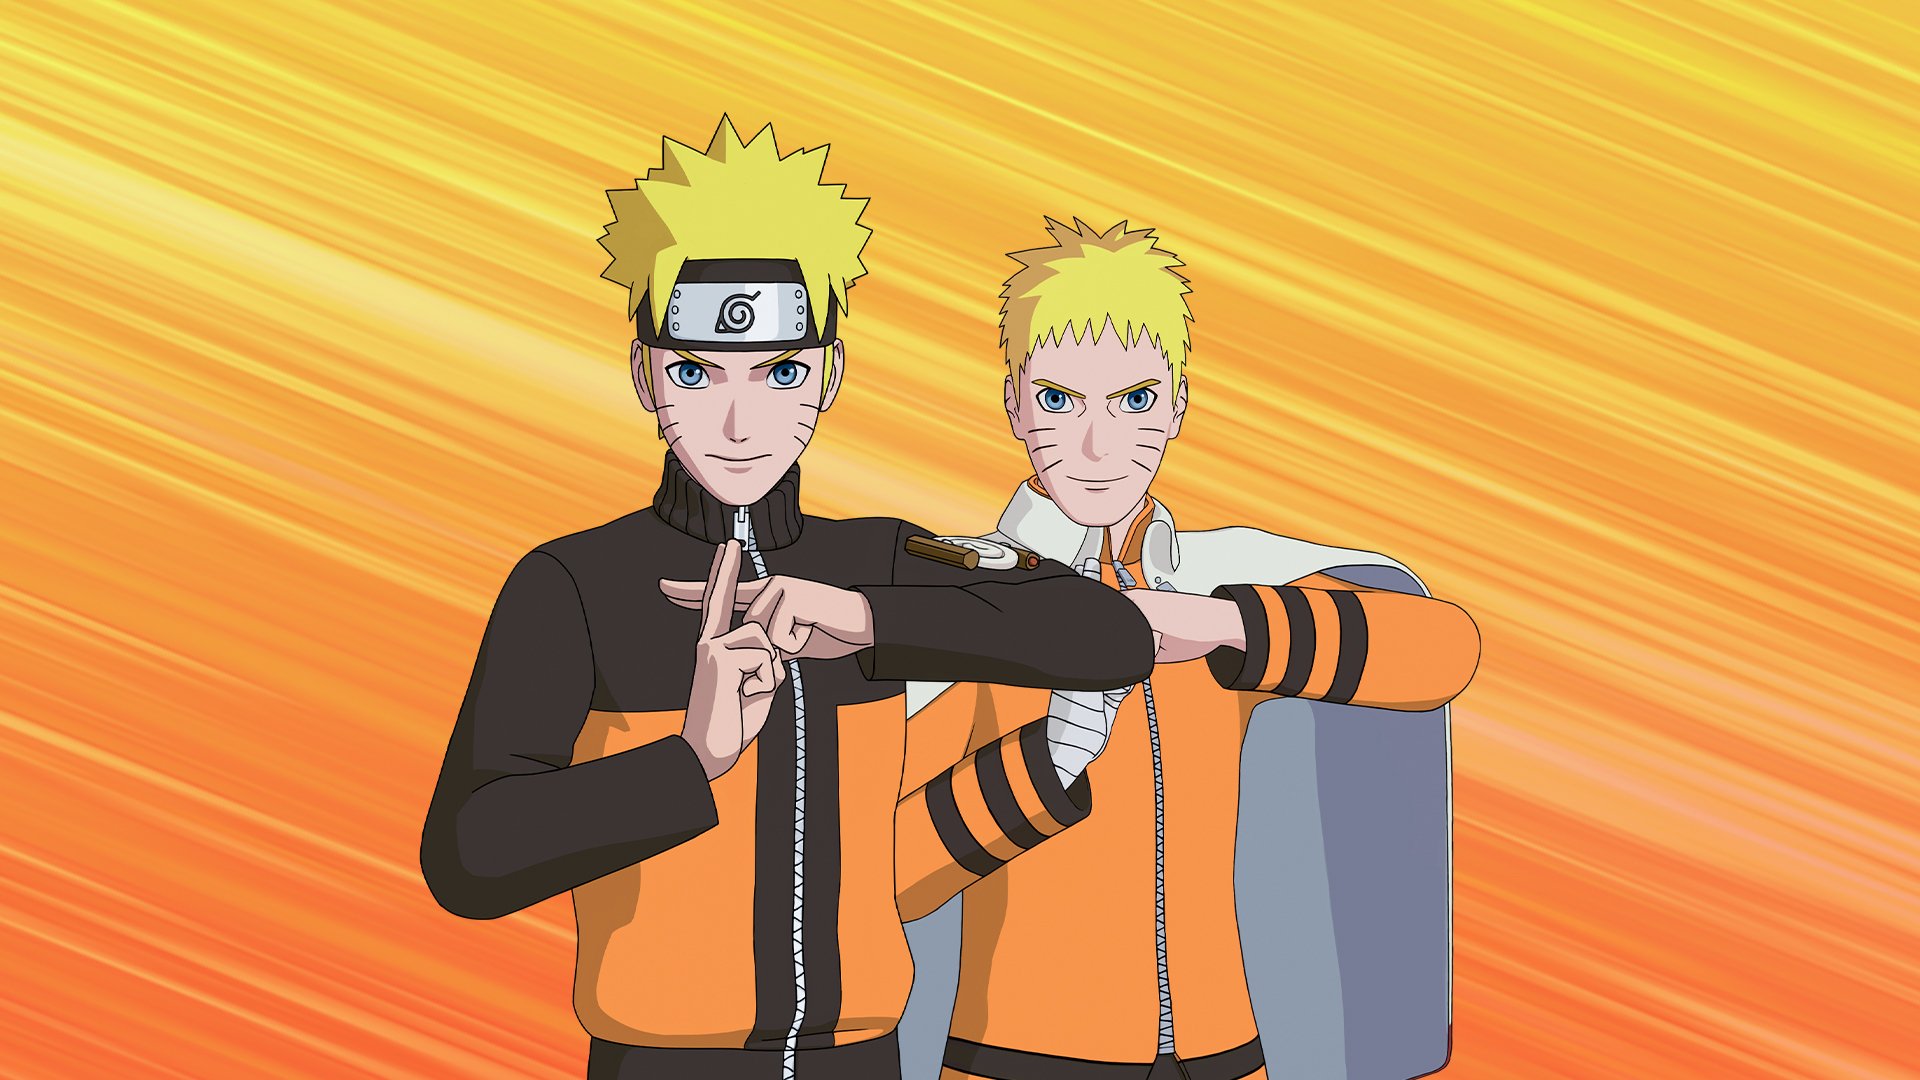 Fortnite Naruto Skins Are Here: First Look At Team 7 In Fortnite